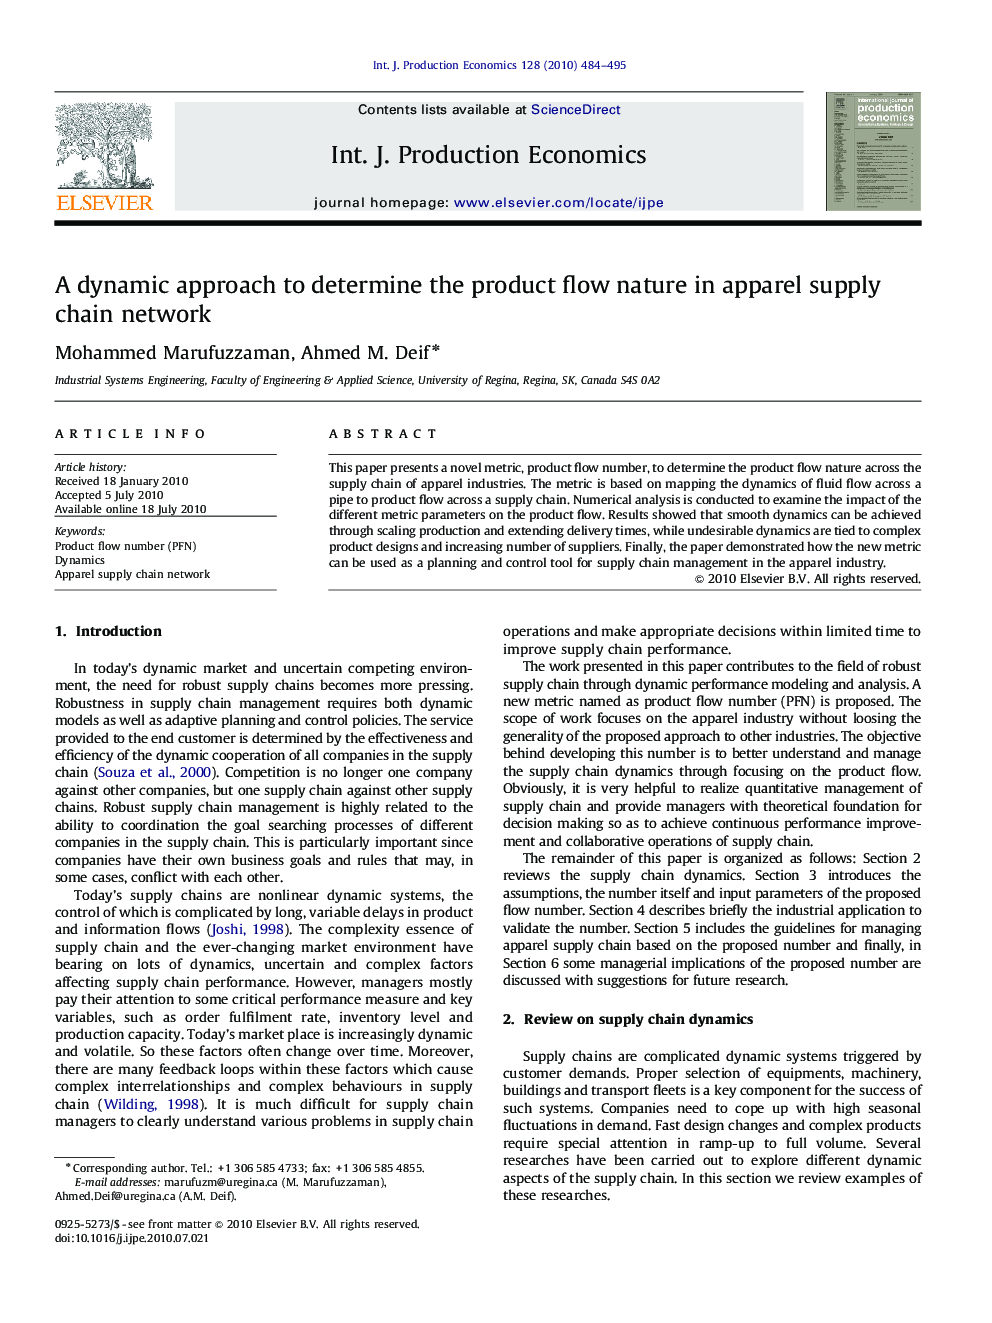 A dynamic approach to determine the product flow nature in apparel supply chain network